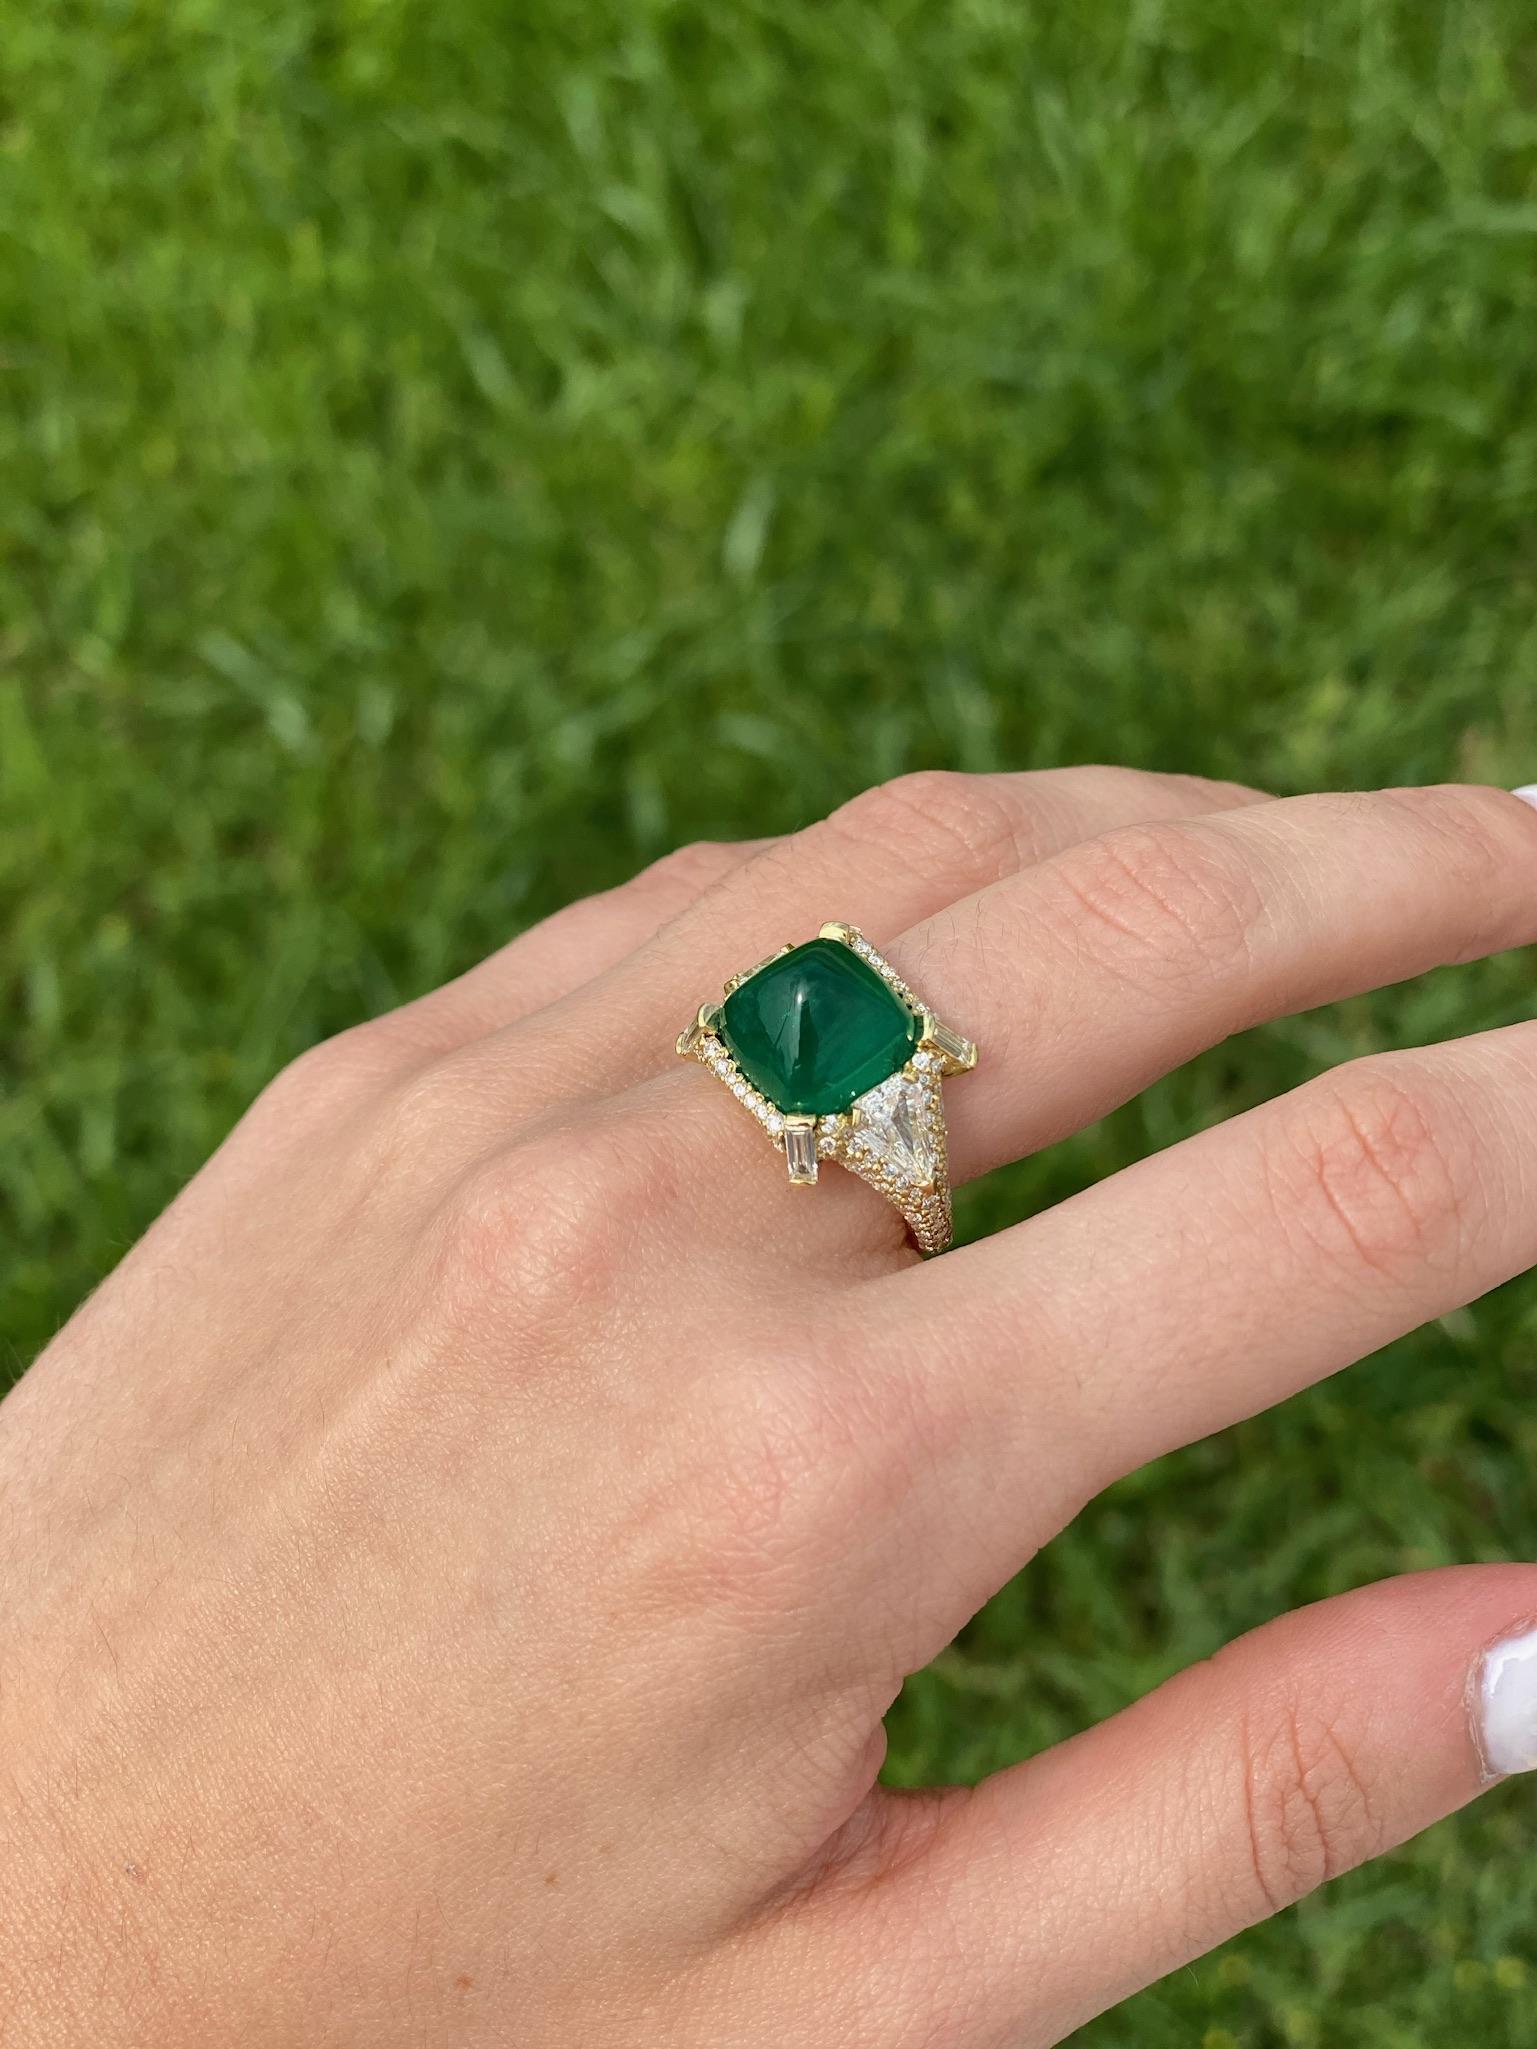 A very important 9.08 carat sugarloaf cabochon Emerald ring complimented with Diamonds by Andrew Glassford. This one-of-a-kind ring has a very intense large Emerald that is flanked by two shield shaped, step cut  GH VSI Diamonds that total 1.08